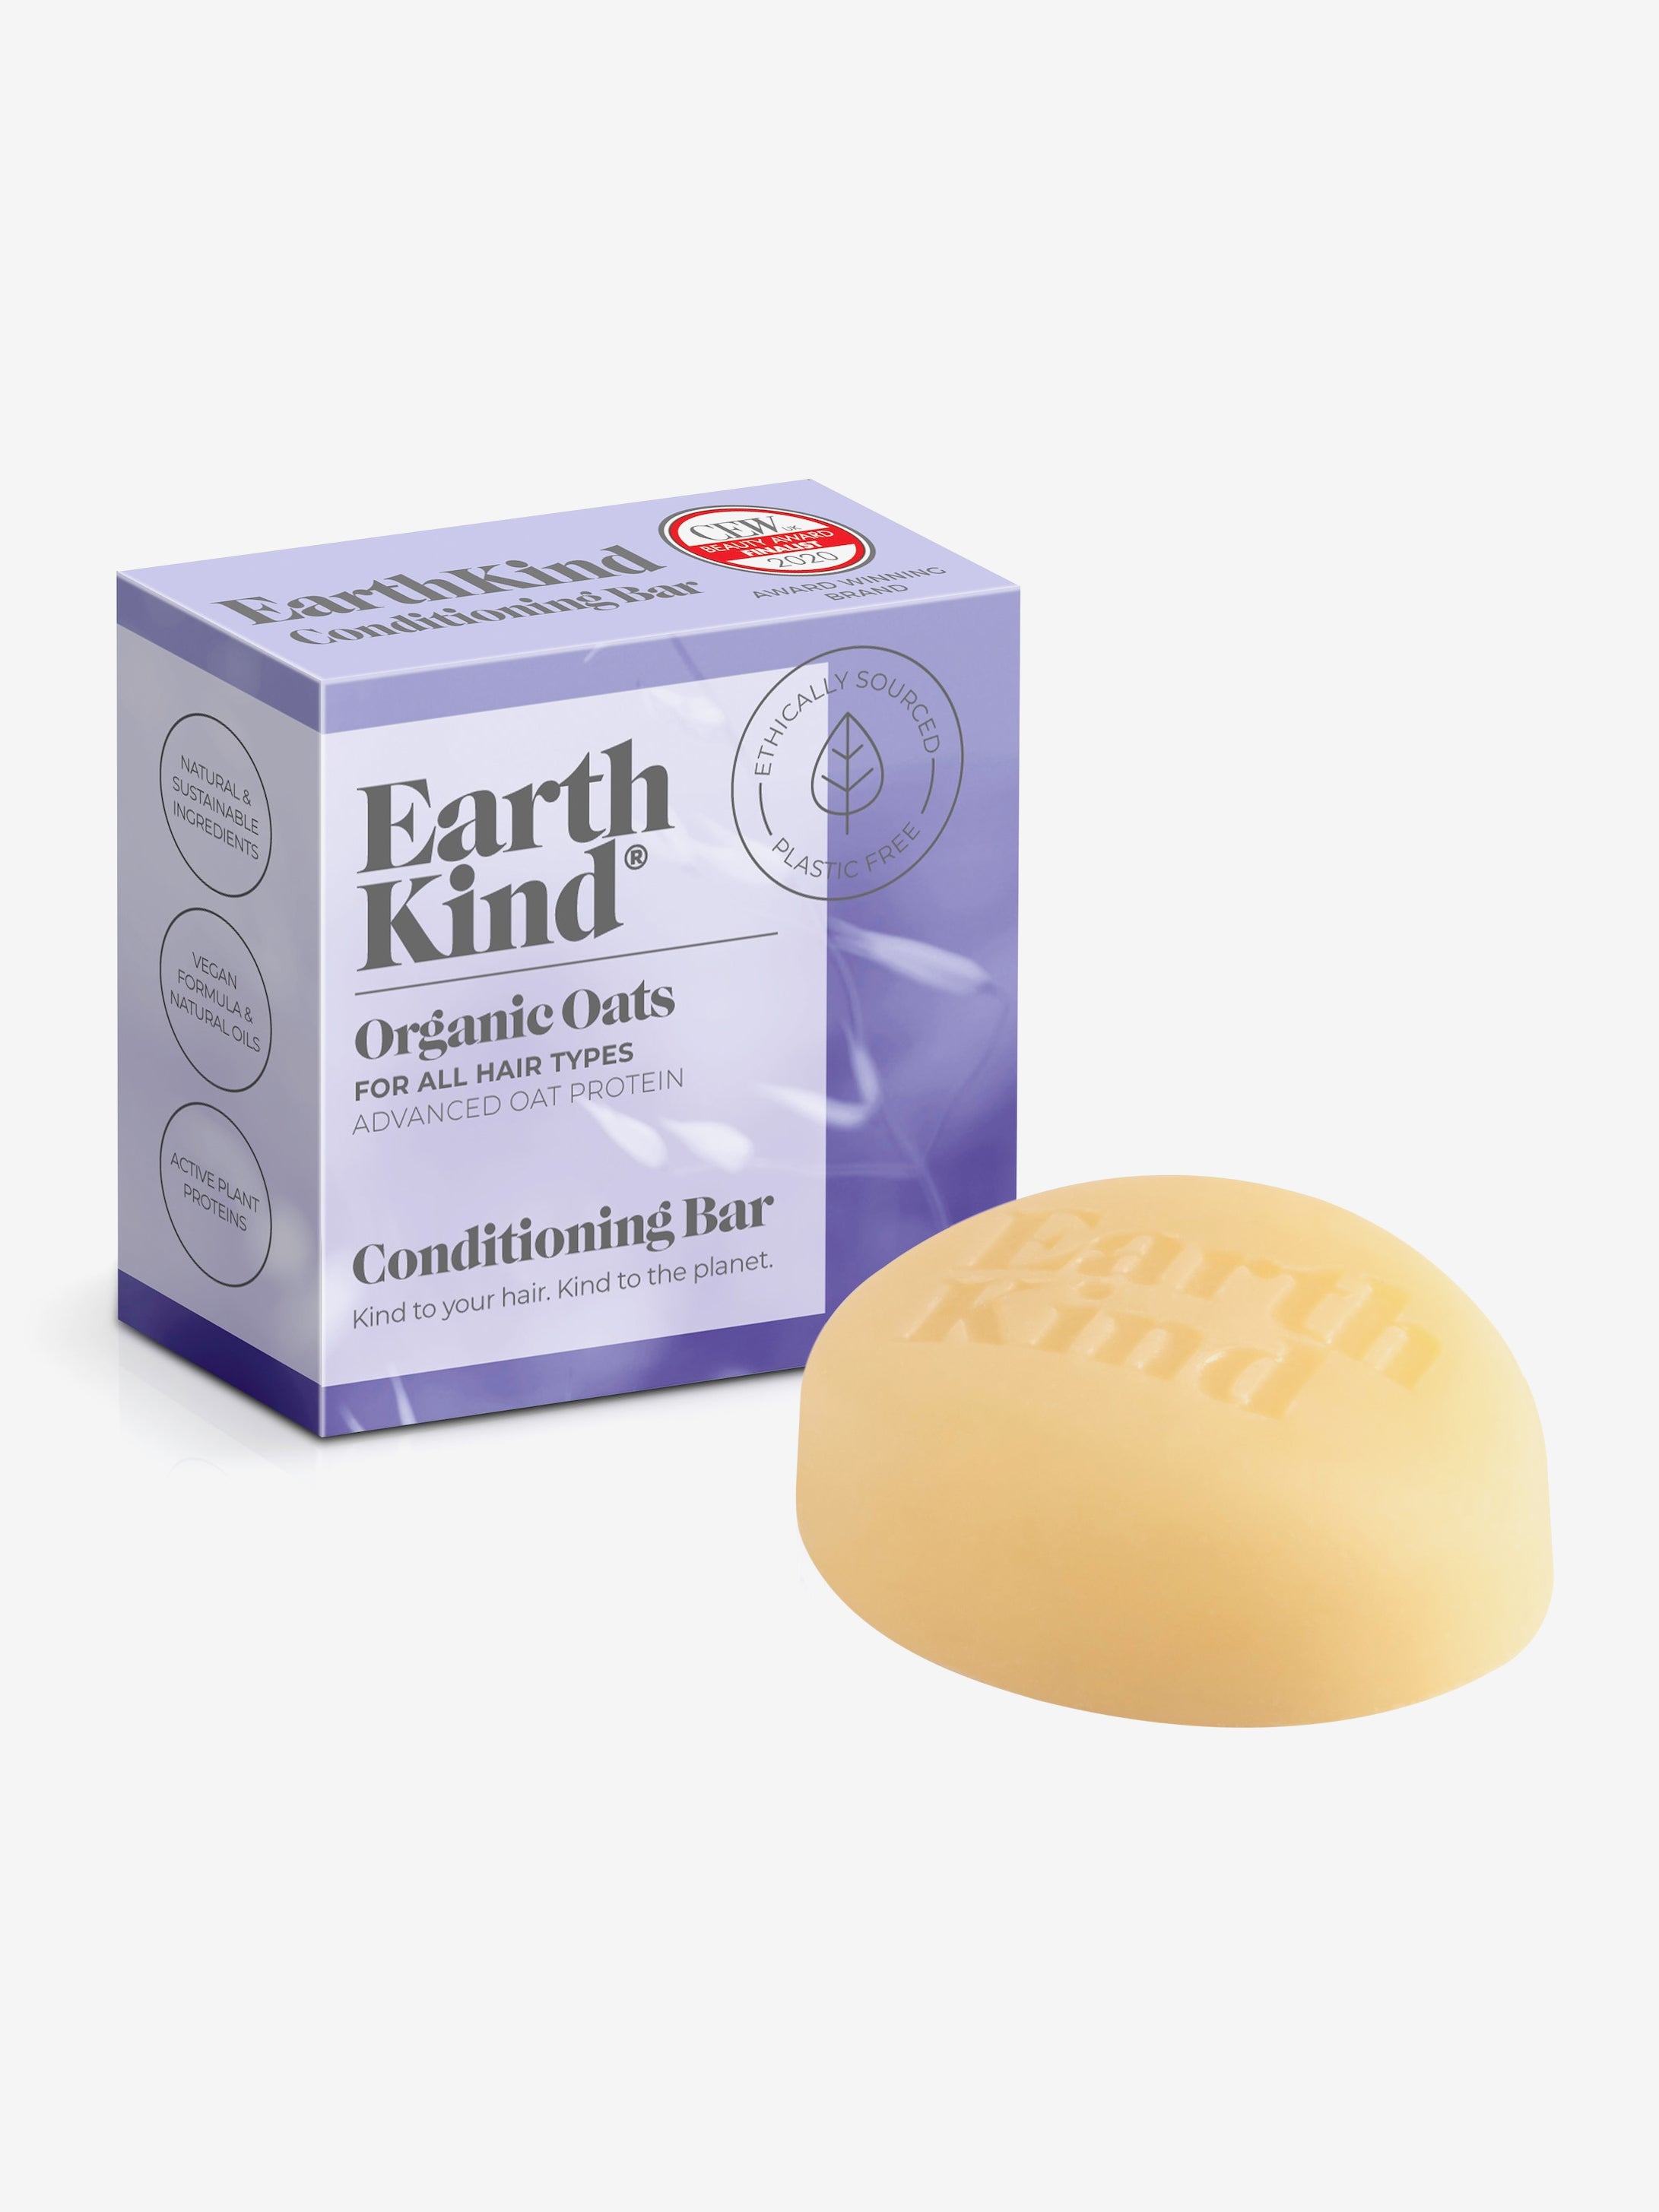 EarthKind Organic Oats Conditioning Bar for All Hair Types